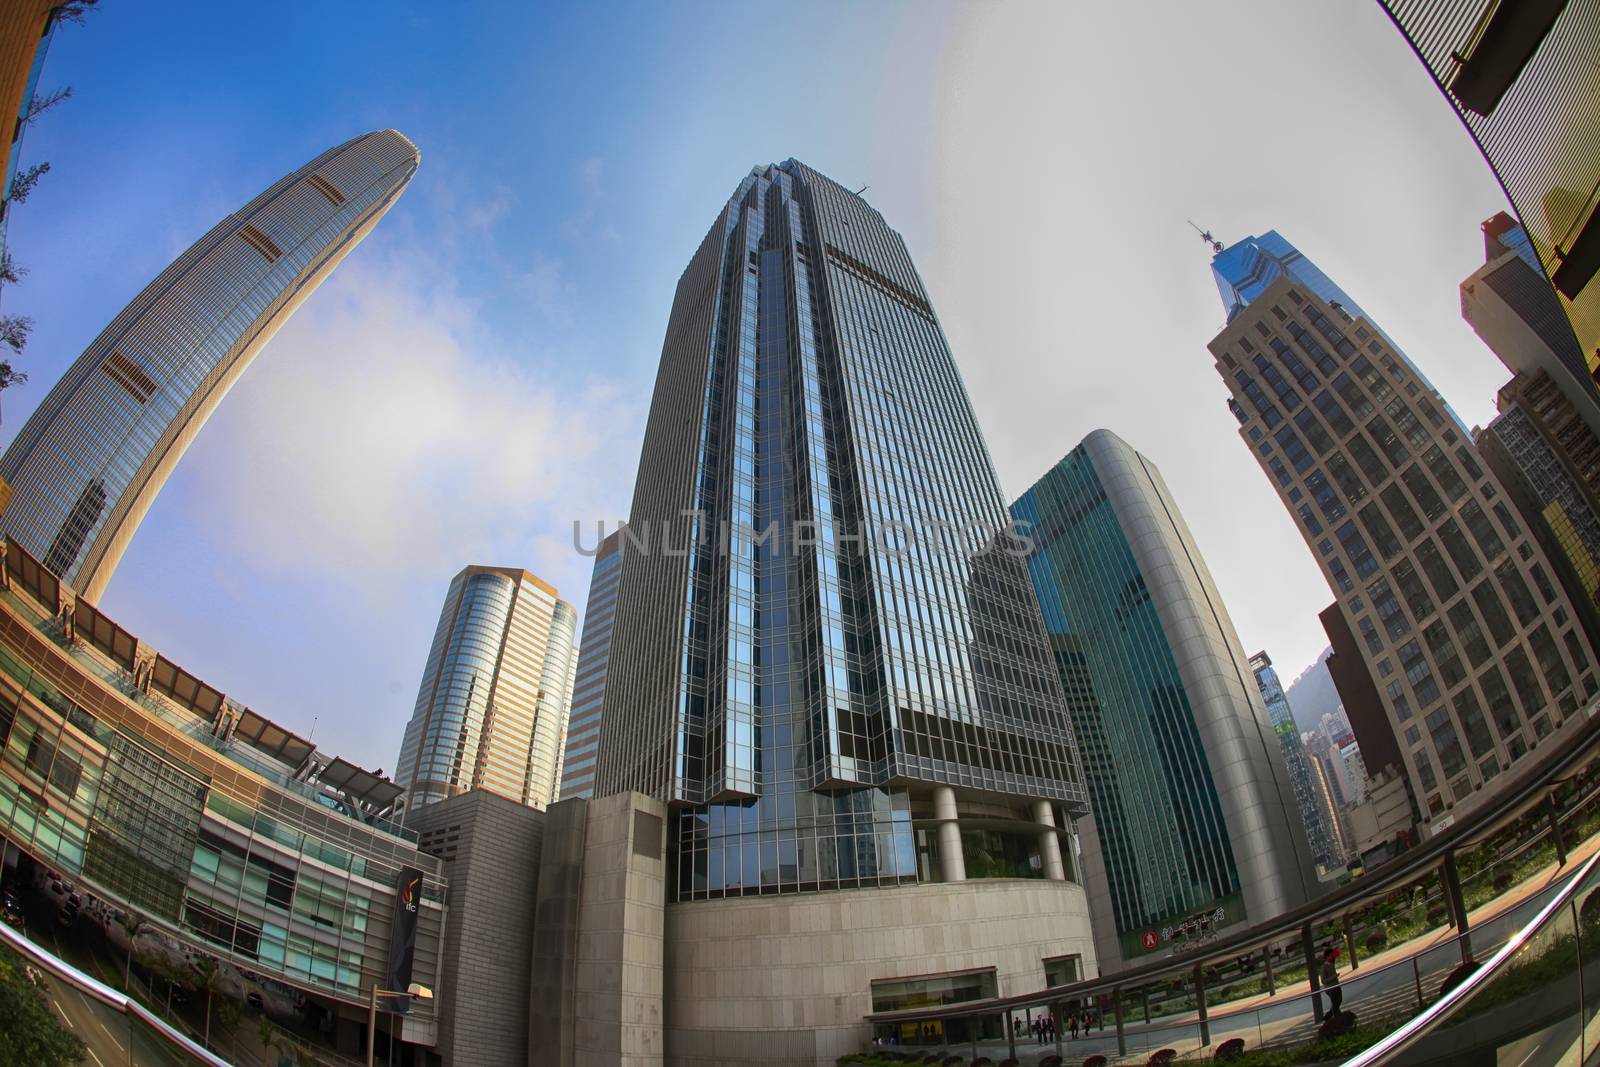  International Finance Centre in Hong Kong by friday